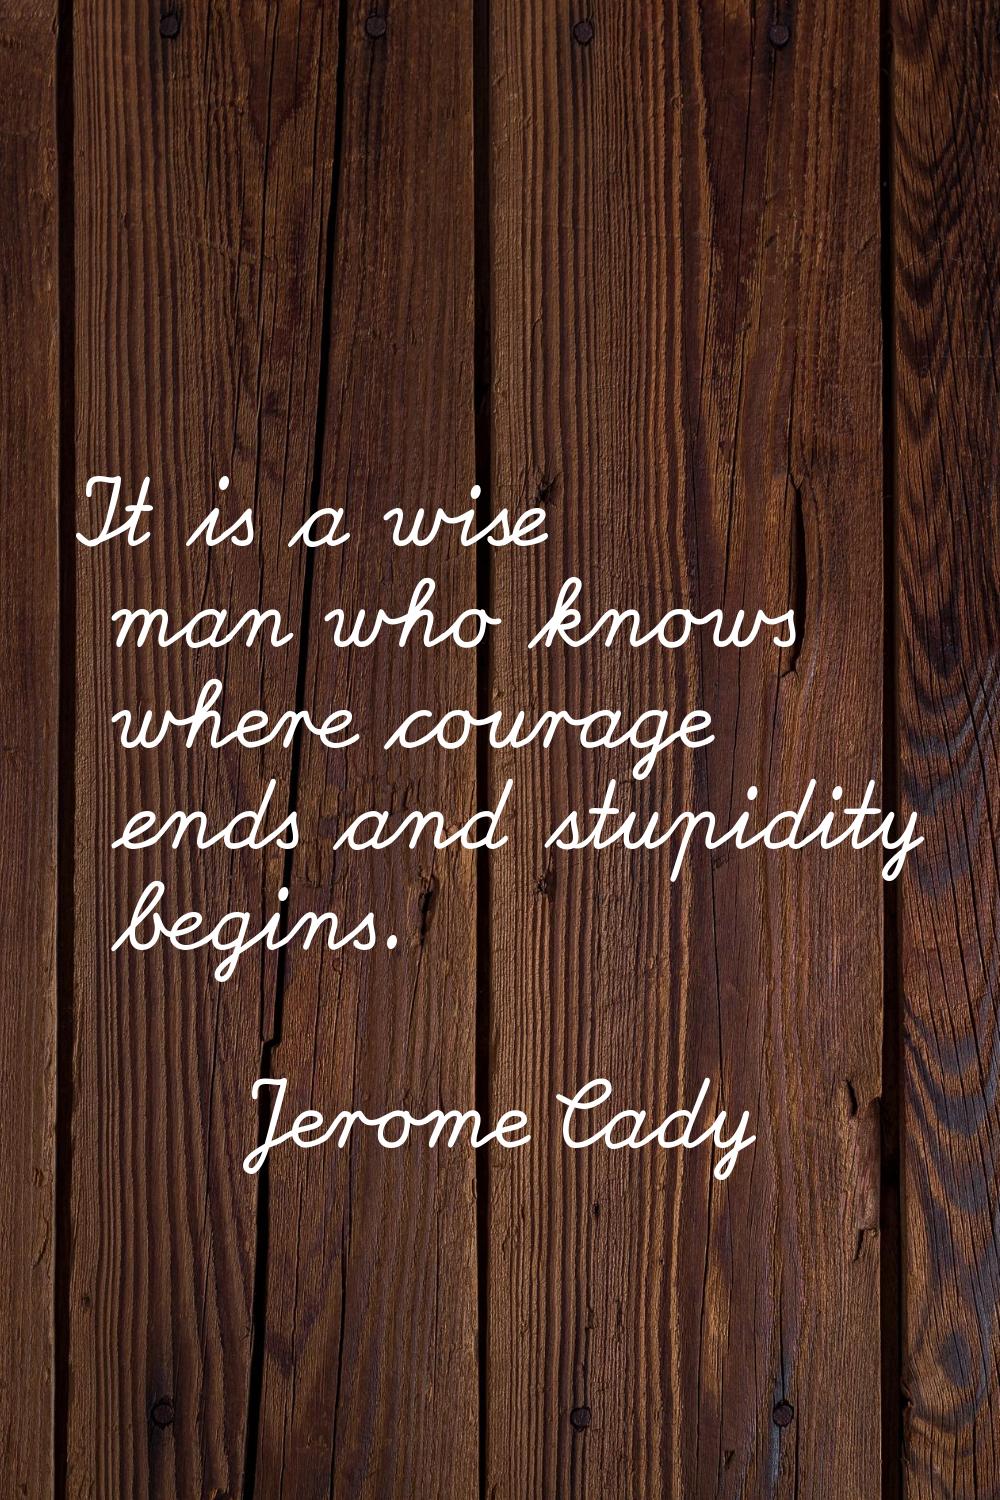 It is a wise man who knows where courage ends and stupidity begins.